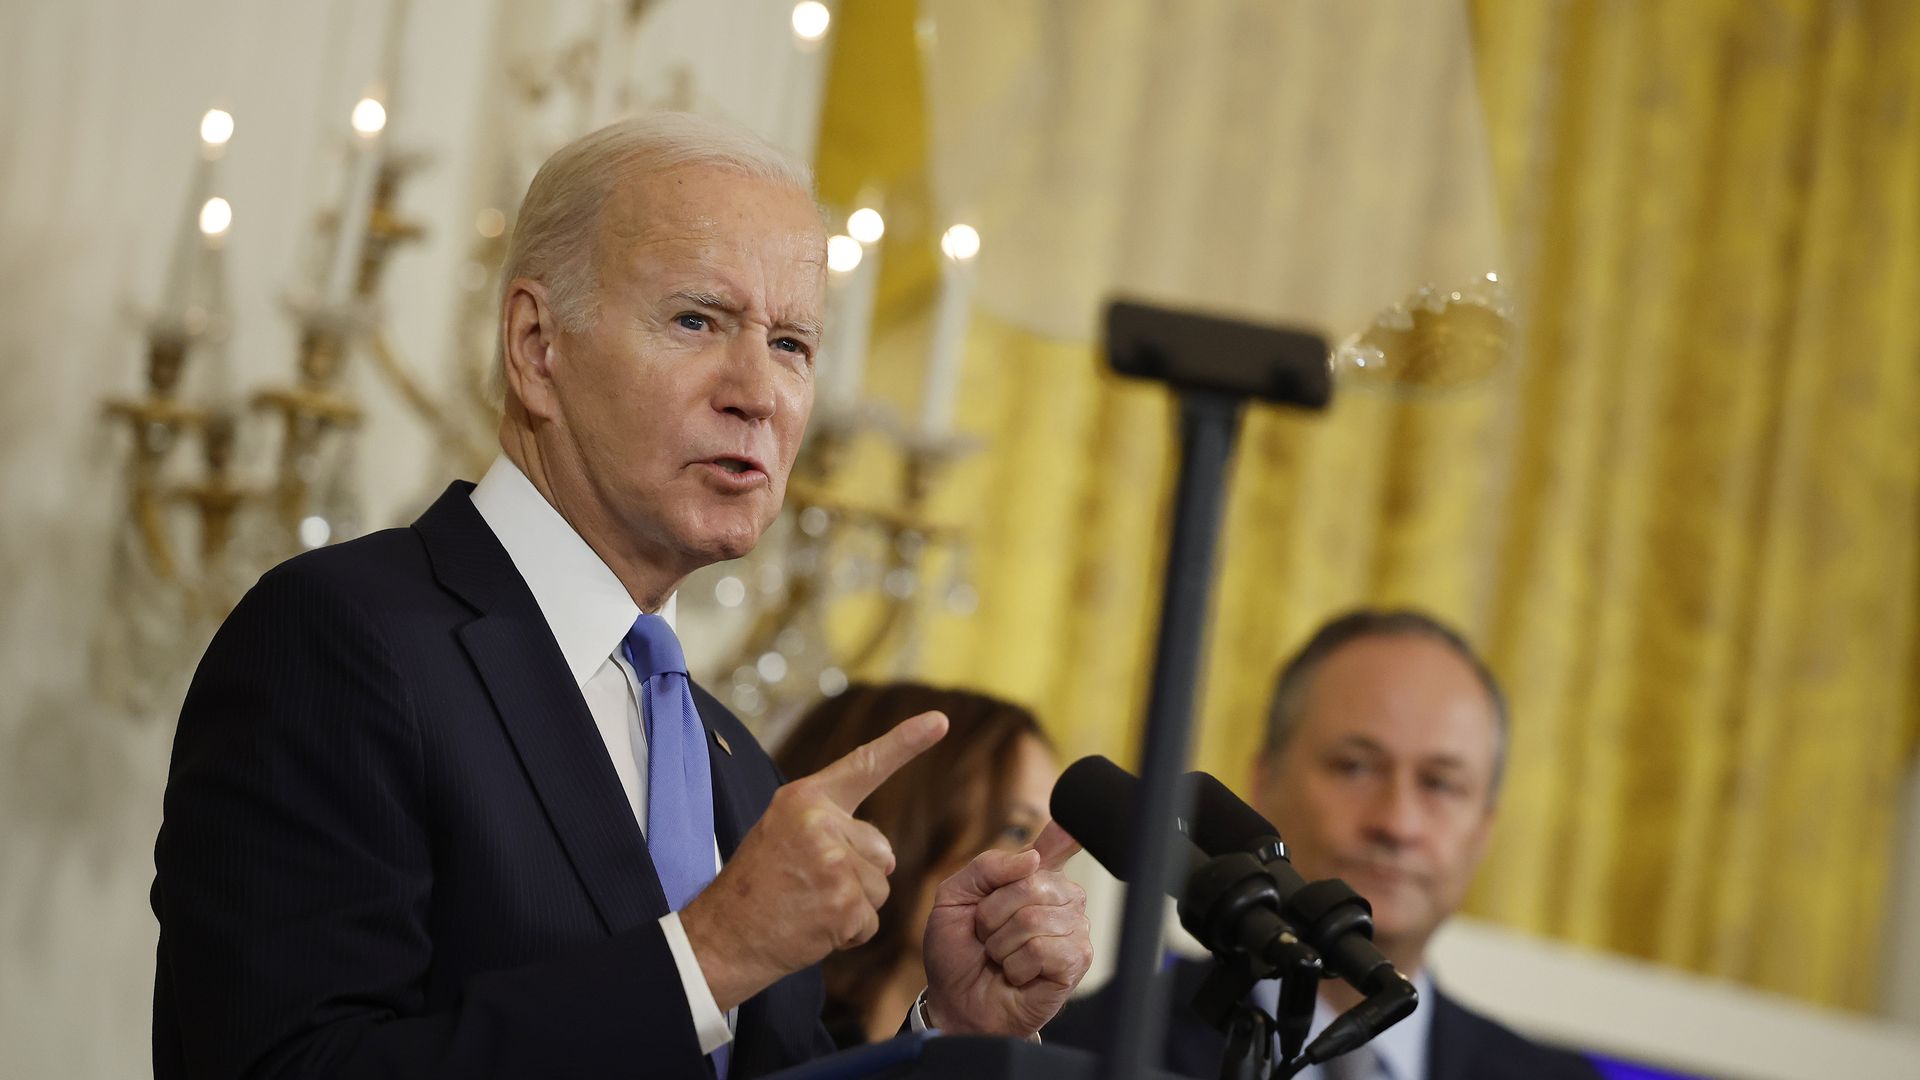 Photo of Joe Biden speaking fro a podium while gesturing with one finger